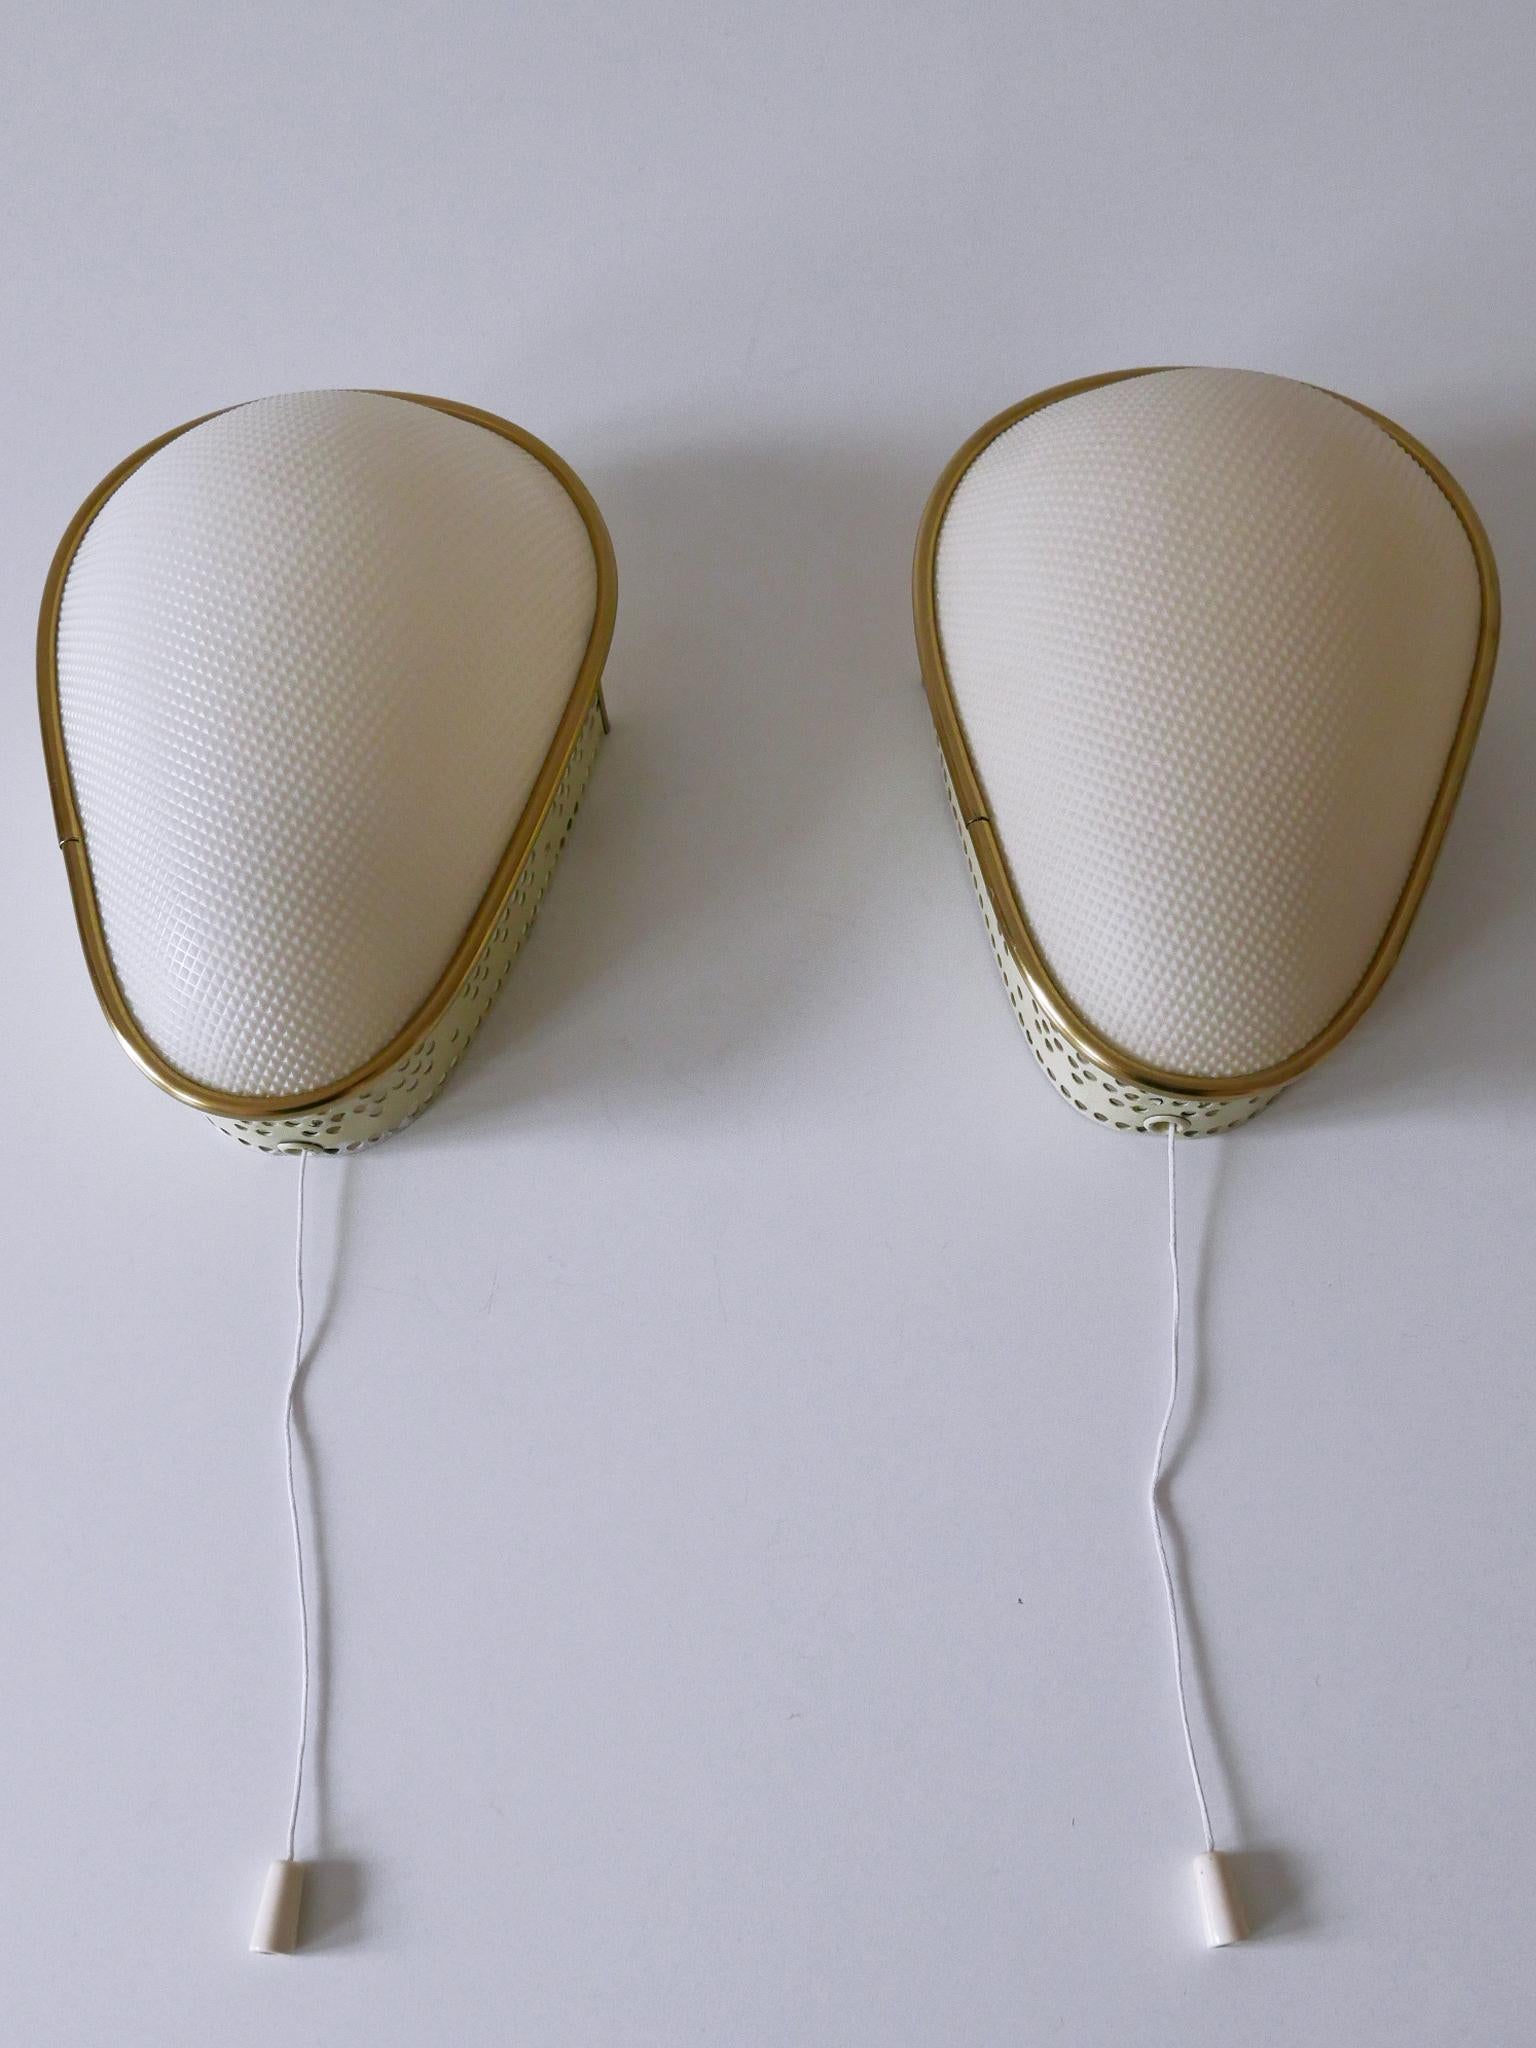 Mid-20th Century Set of Two Rare & Elegant Mid-Century Modern Sconces or Wall Lamps Germany 1950s For Sale